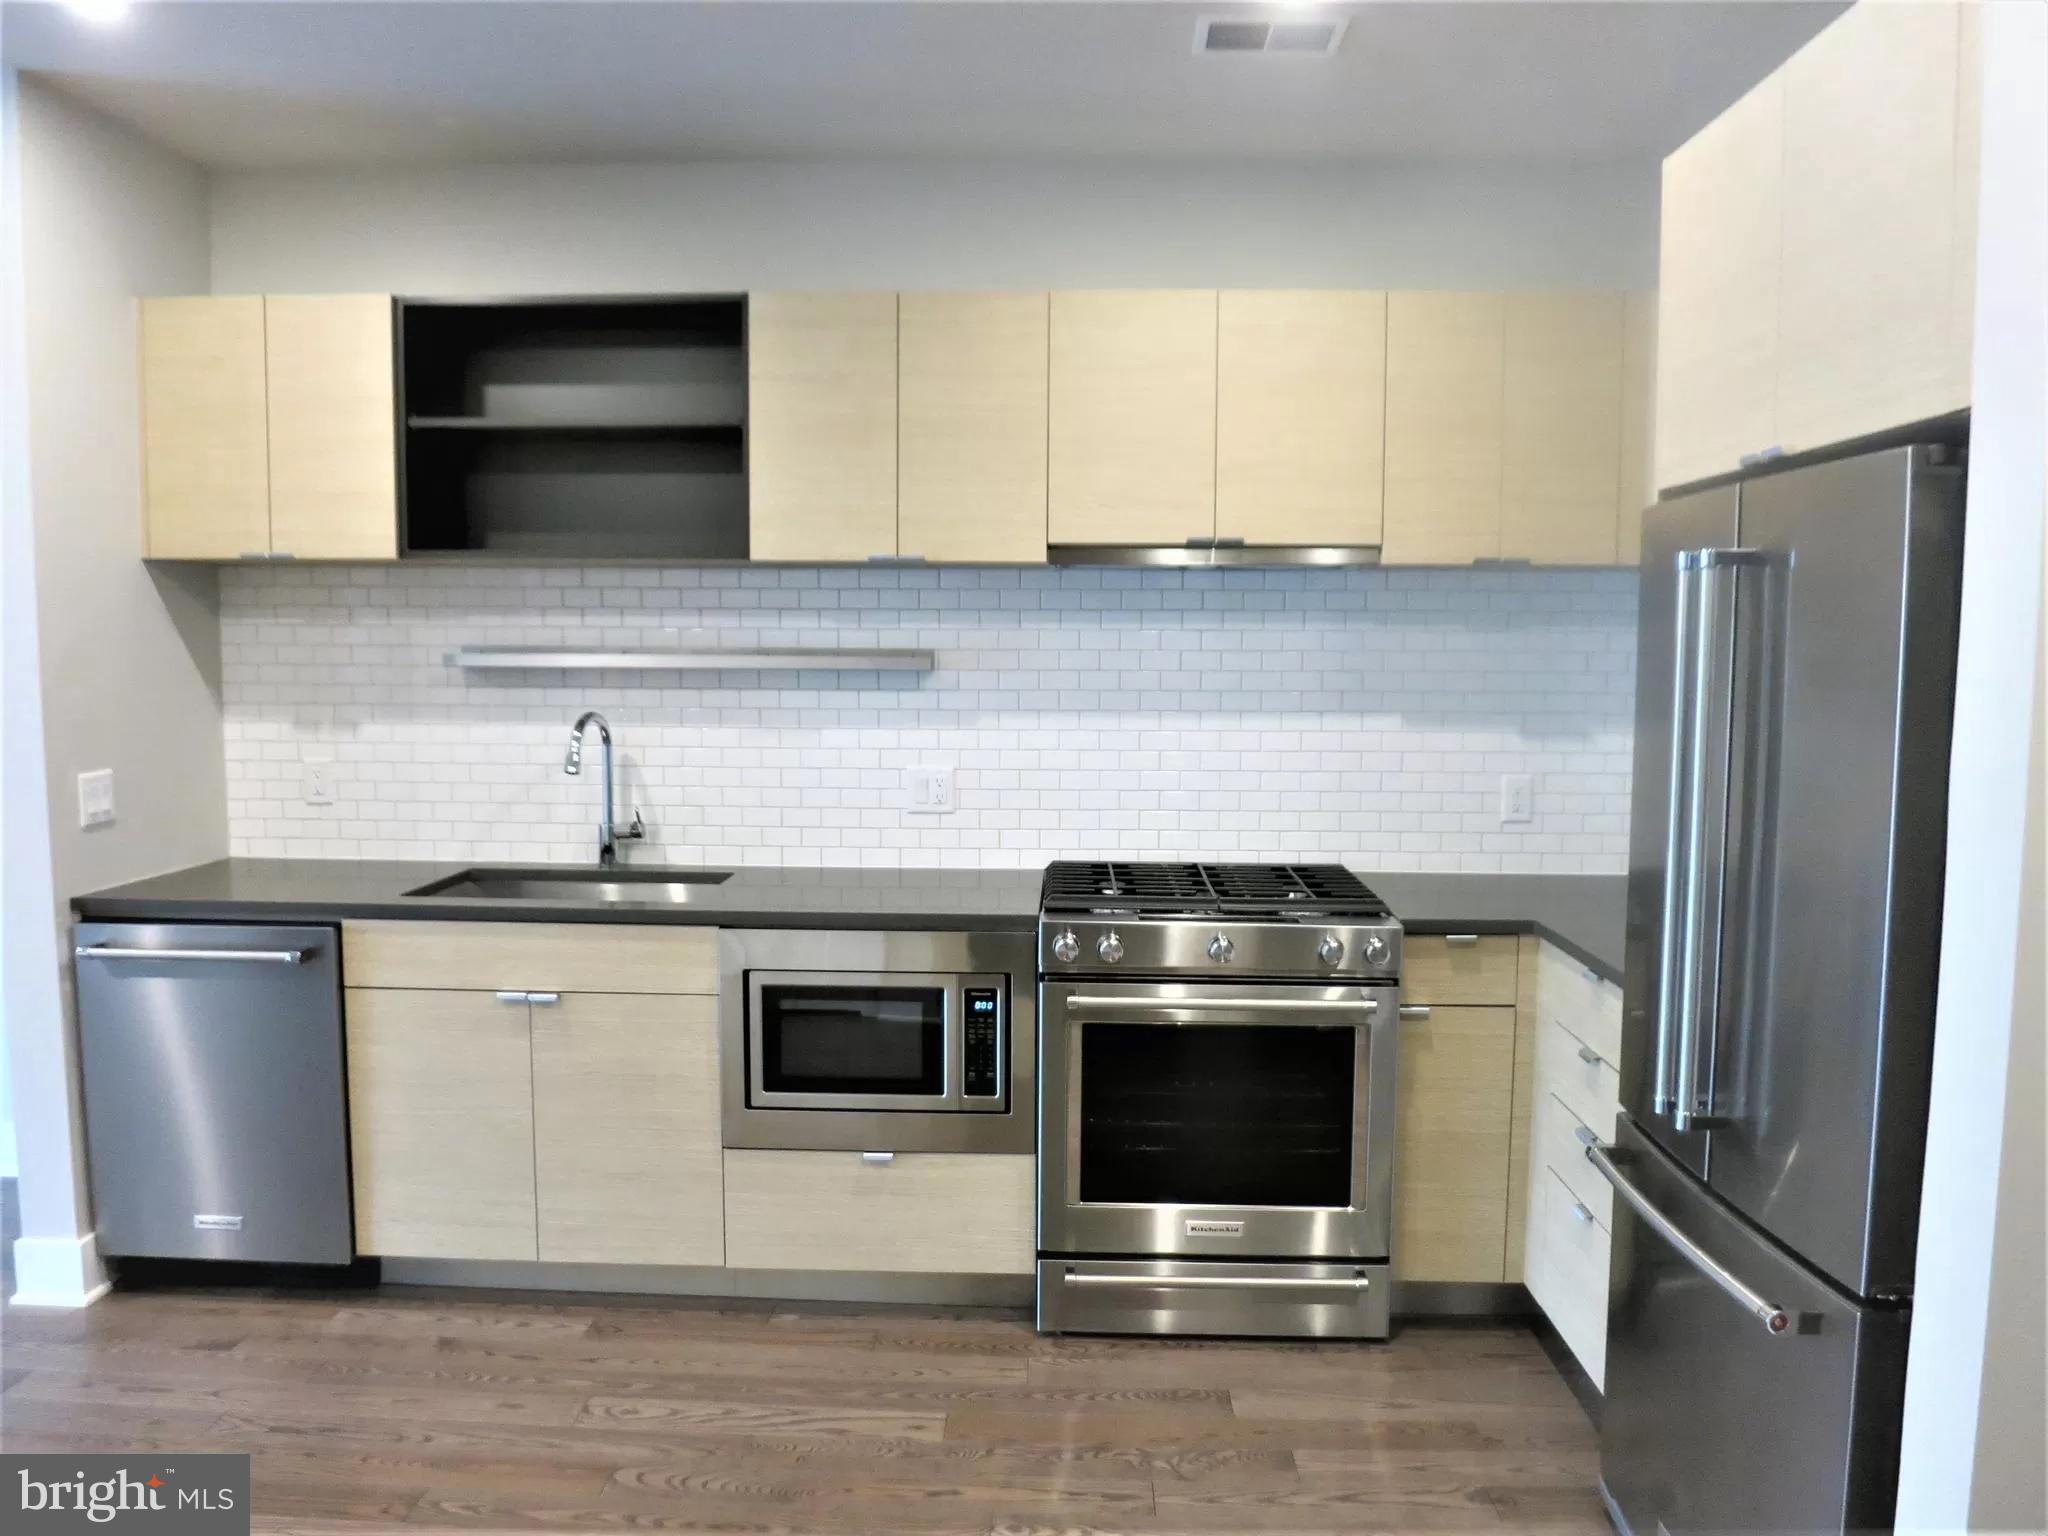 a kitchen with stainless steel appliances a stove a microwave and a sink